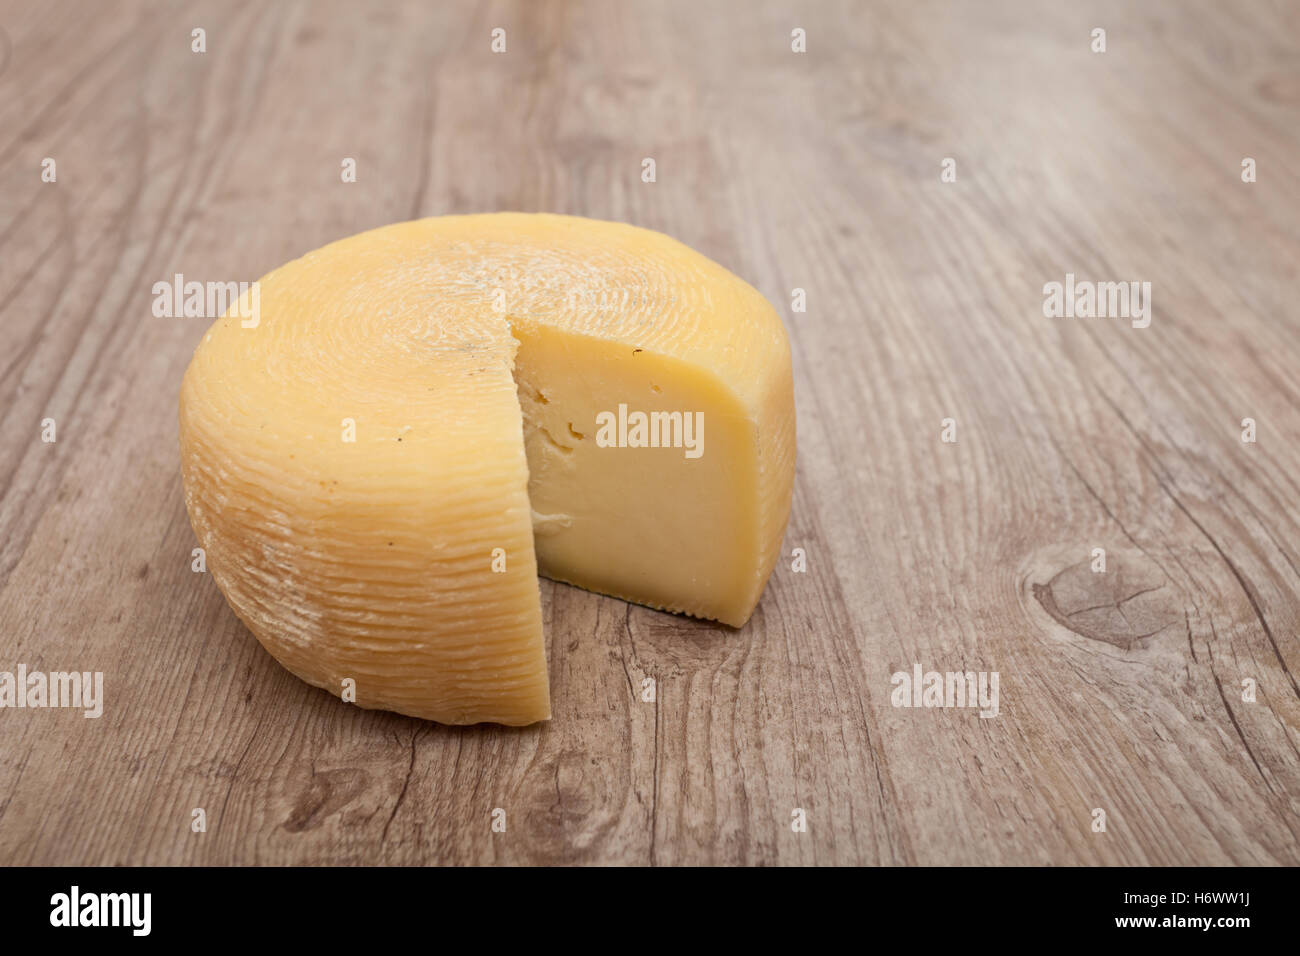 kitchen cuisine cheese dairy parmesan cuts food aliment gastronomy milk kitchen cuisine shape italian dish meal cheese product Stock Photo